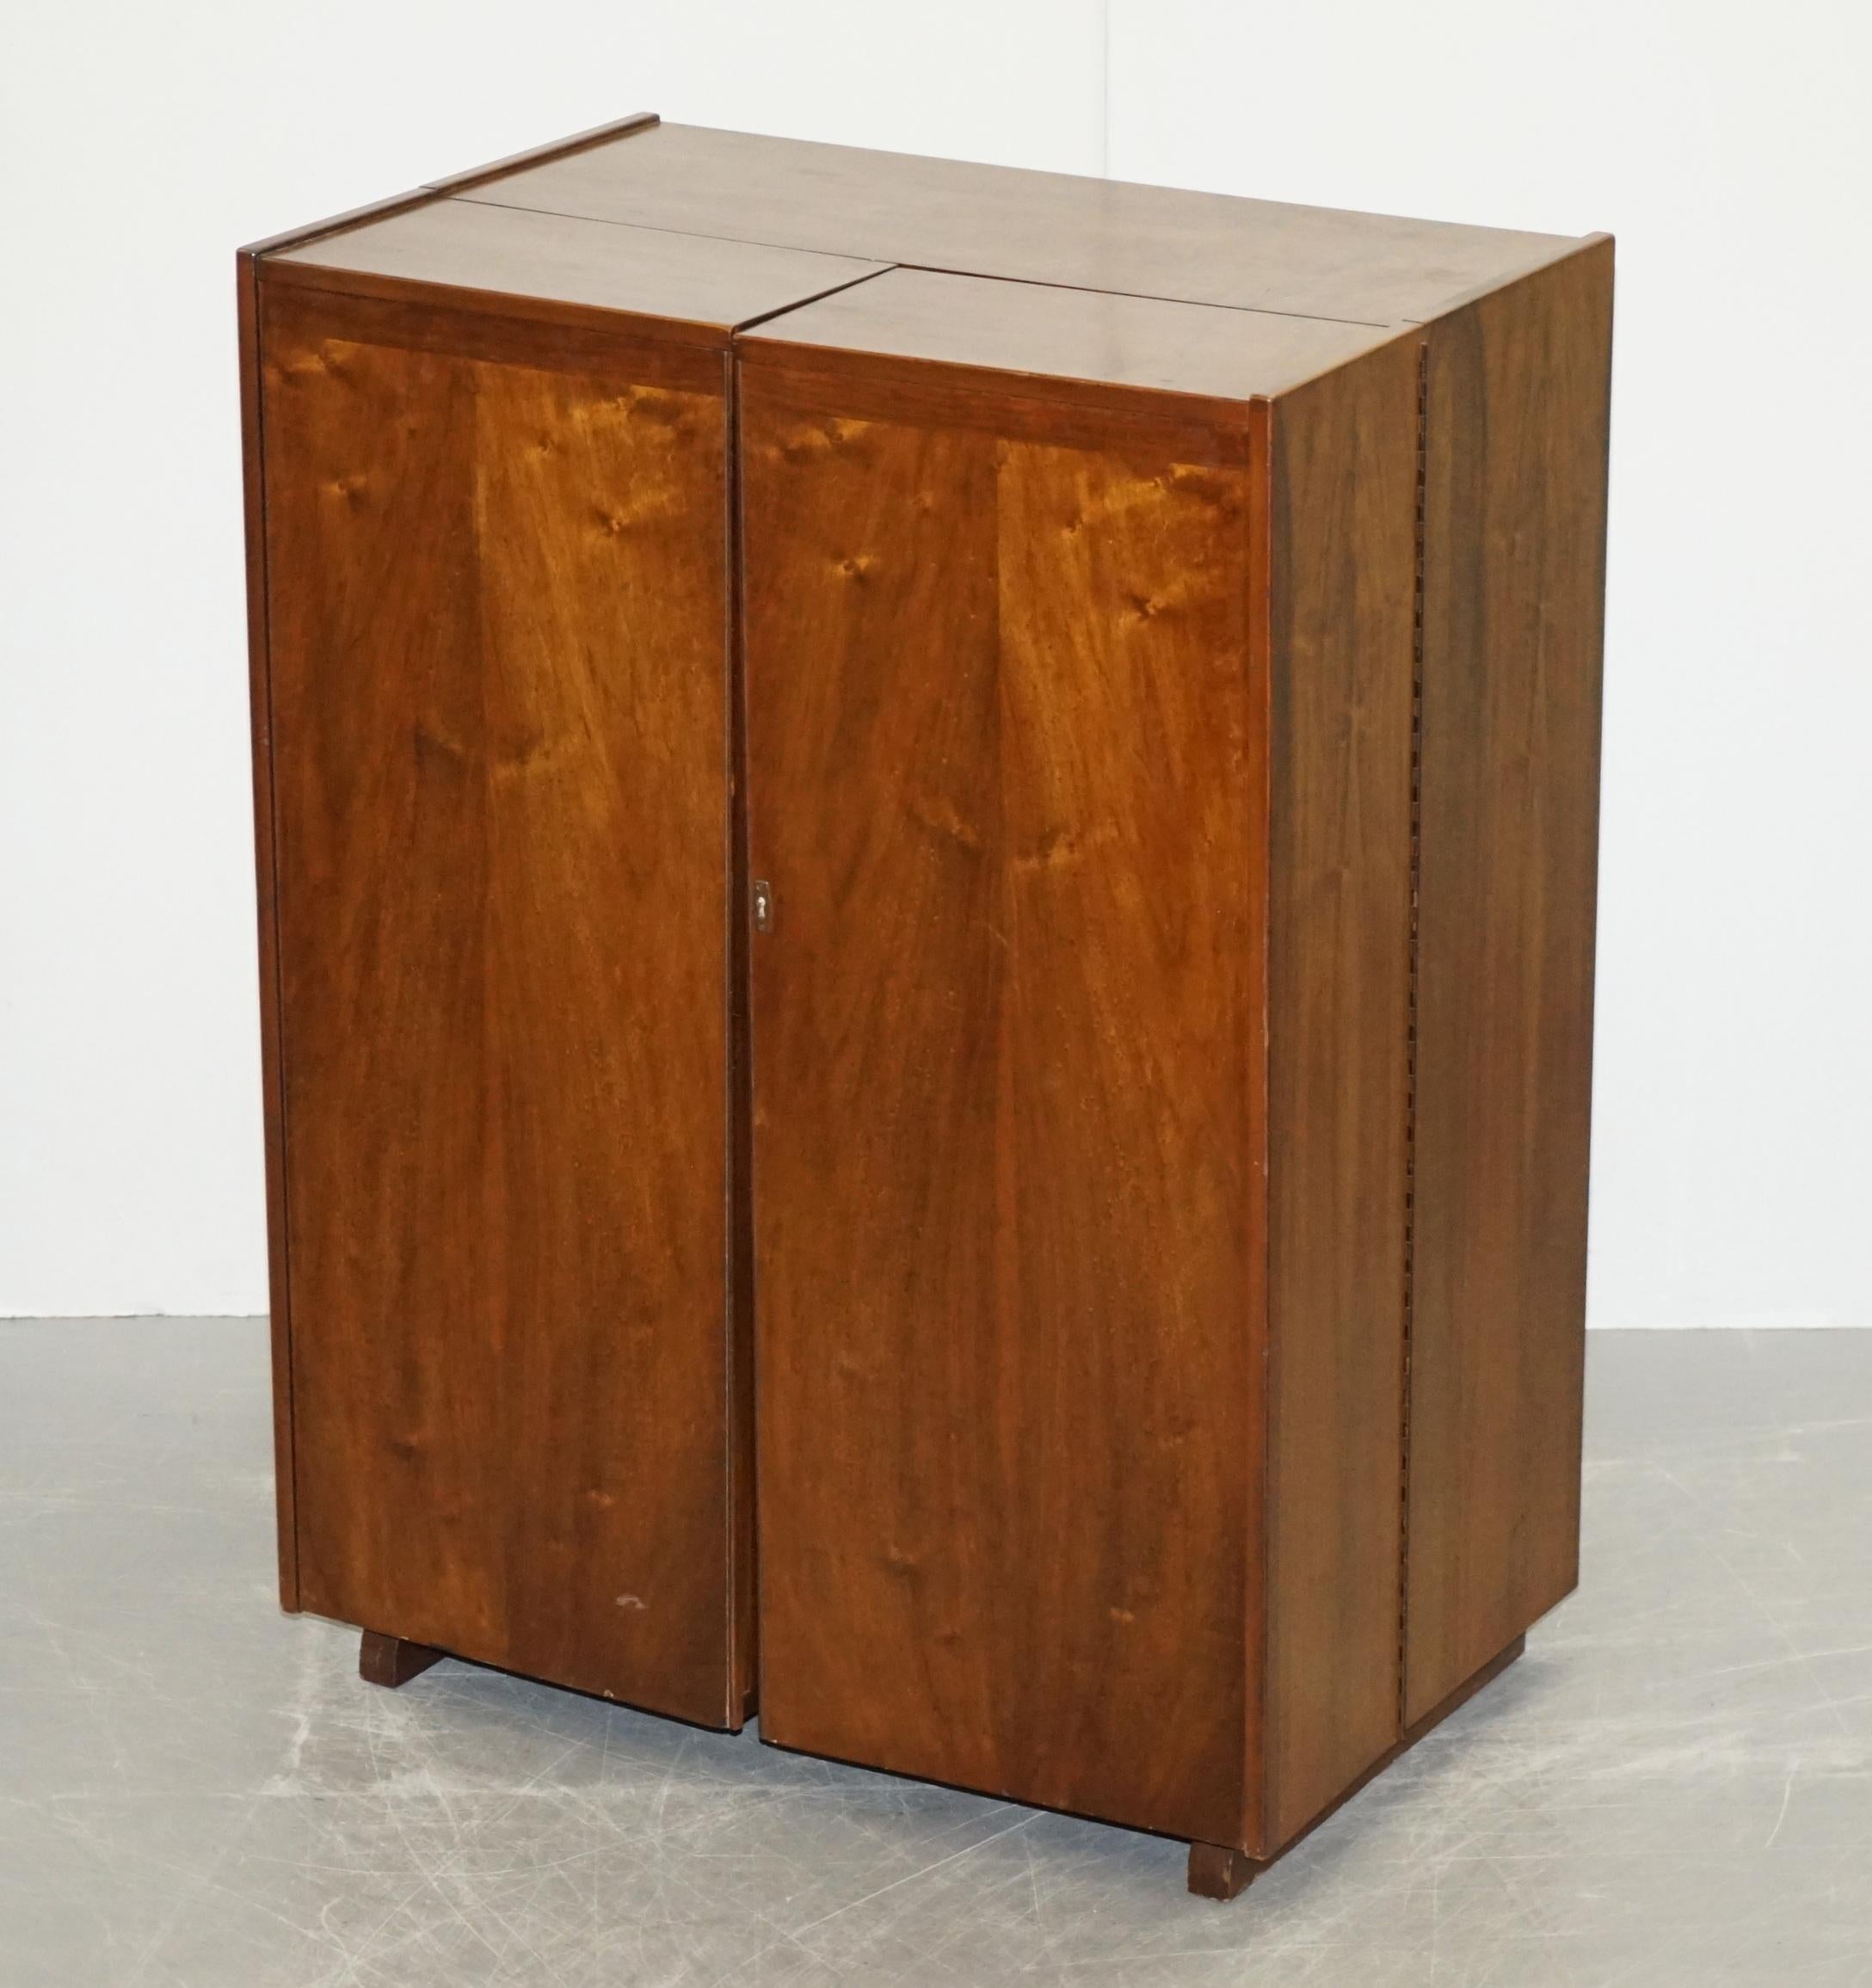 We are delighted to offer for sale this great mid-century modern circa 1960 solid teak at home desk compendium

Have you ever seen a more perfect piece of furniture for right now, a folding at home office! This is a very utilitarian piece, ideally